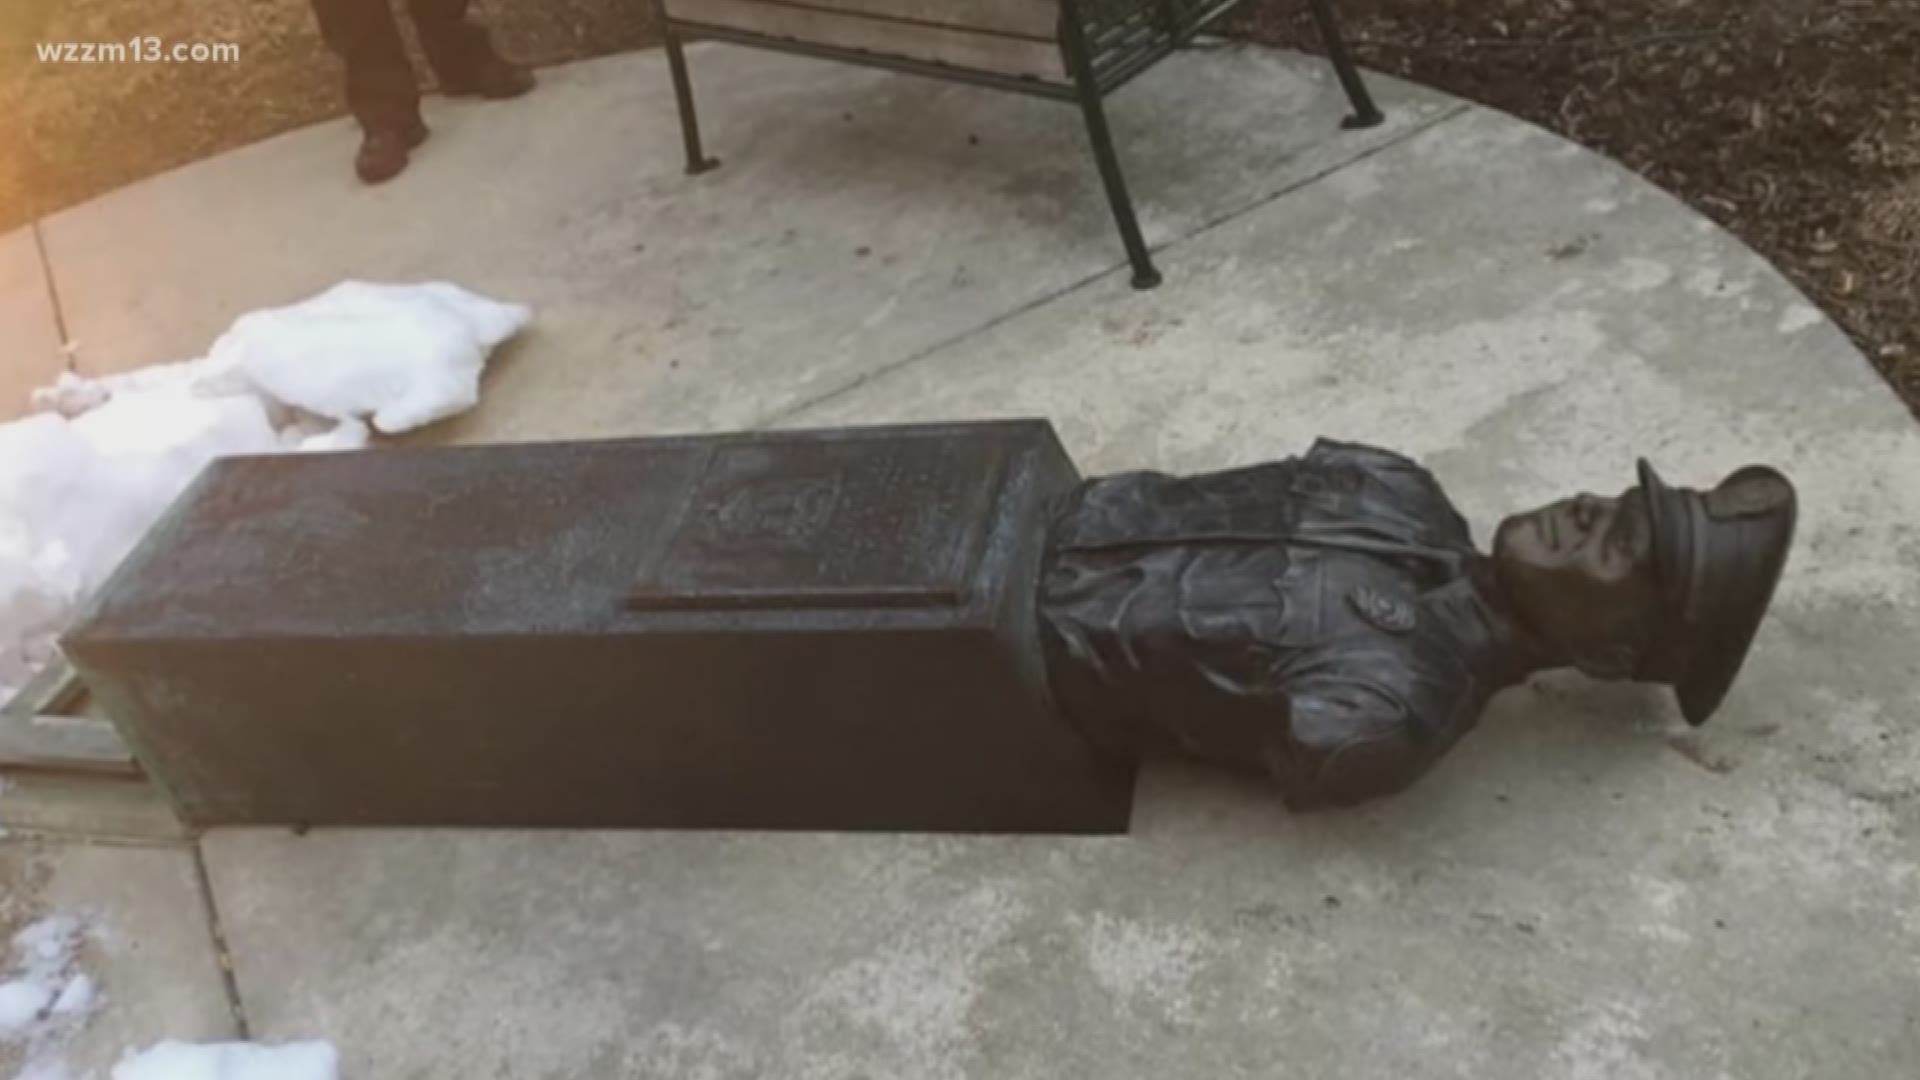 Police used video surveillance to identify the man who toppled over the Eric Zapata Memorial Statue in Kalamazoo. The suspect was arrested Sunday afternoon.